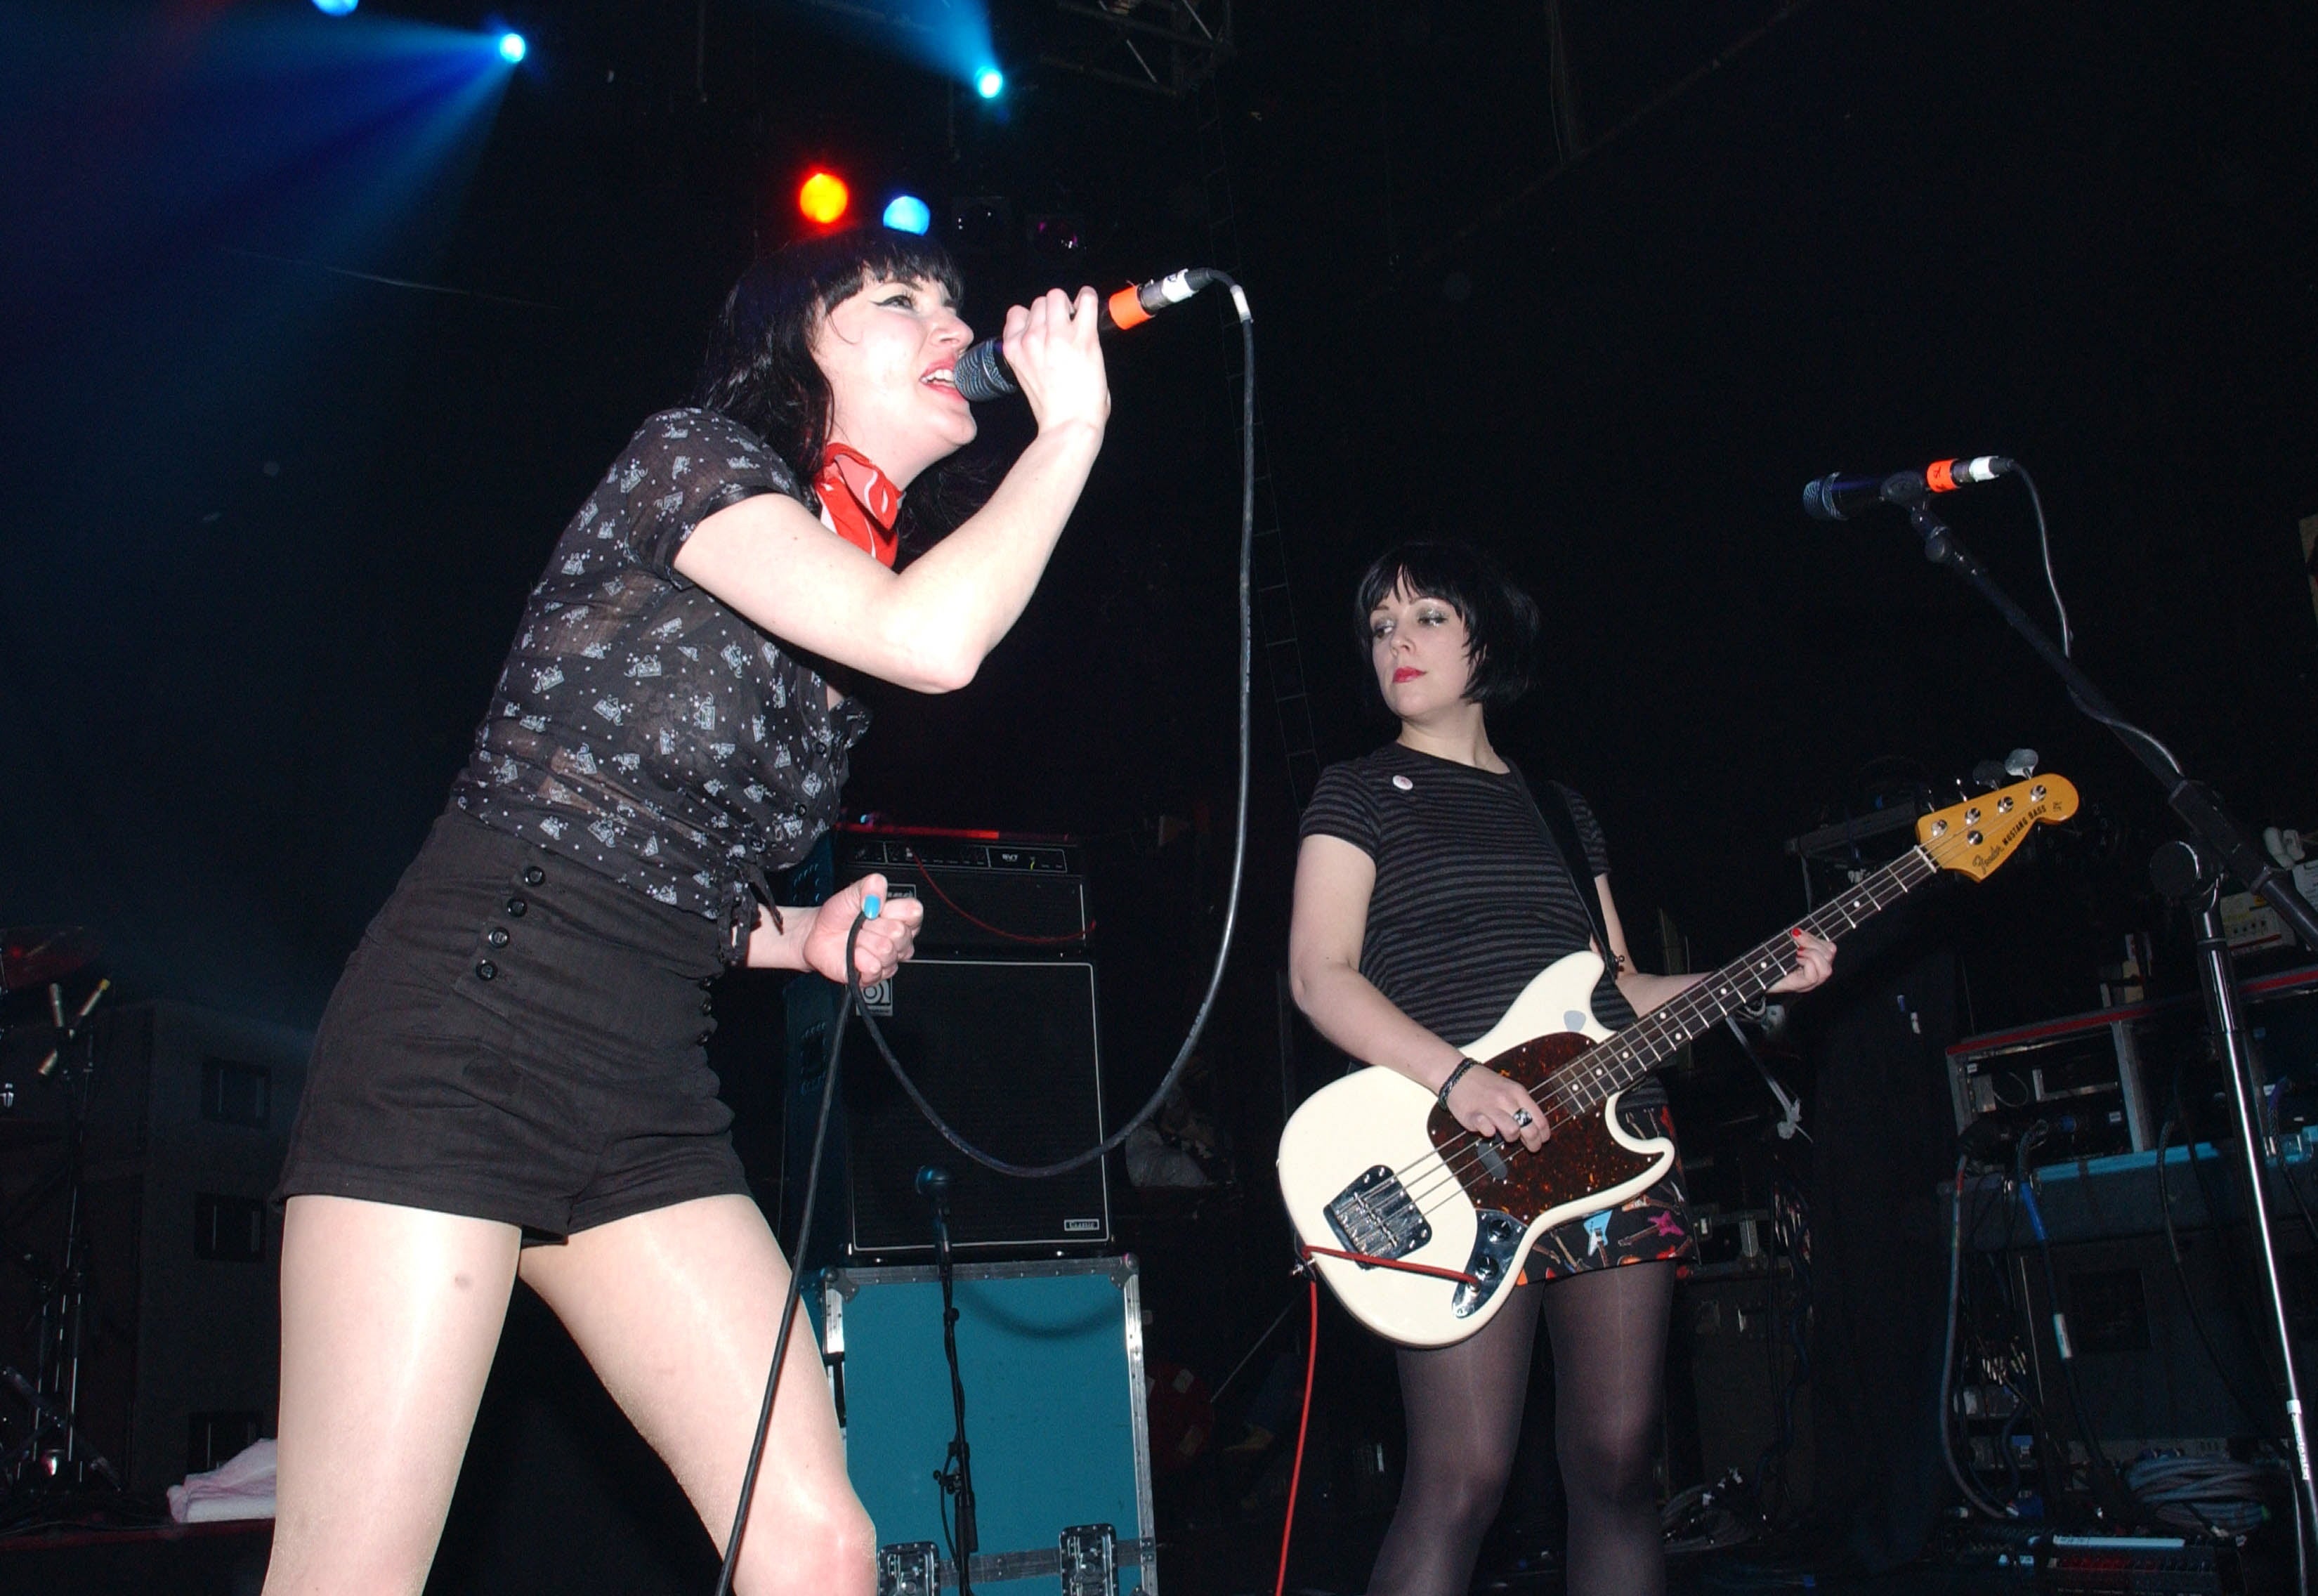 Reenie Delaney and Kate Jackson of the Long Blondes performing at the Astoria in London